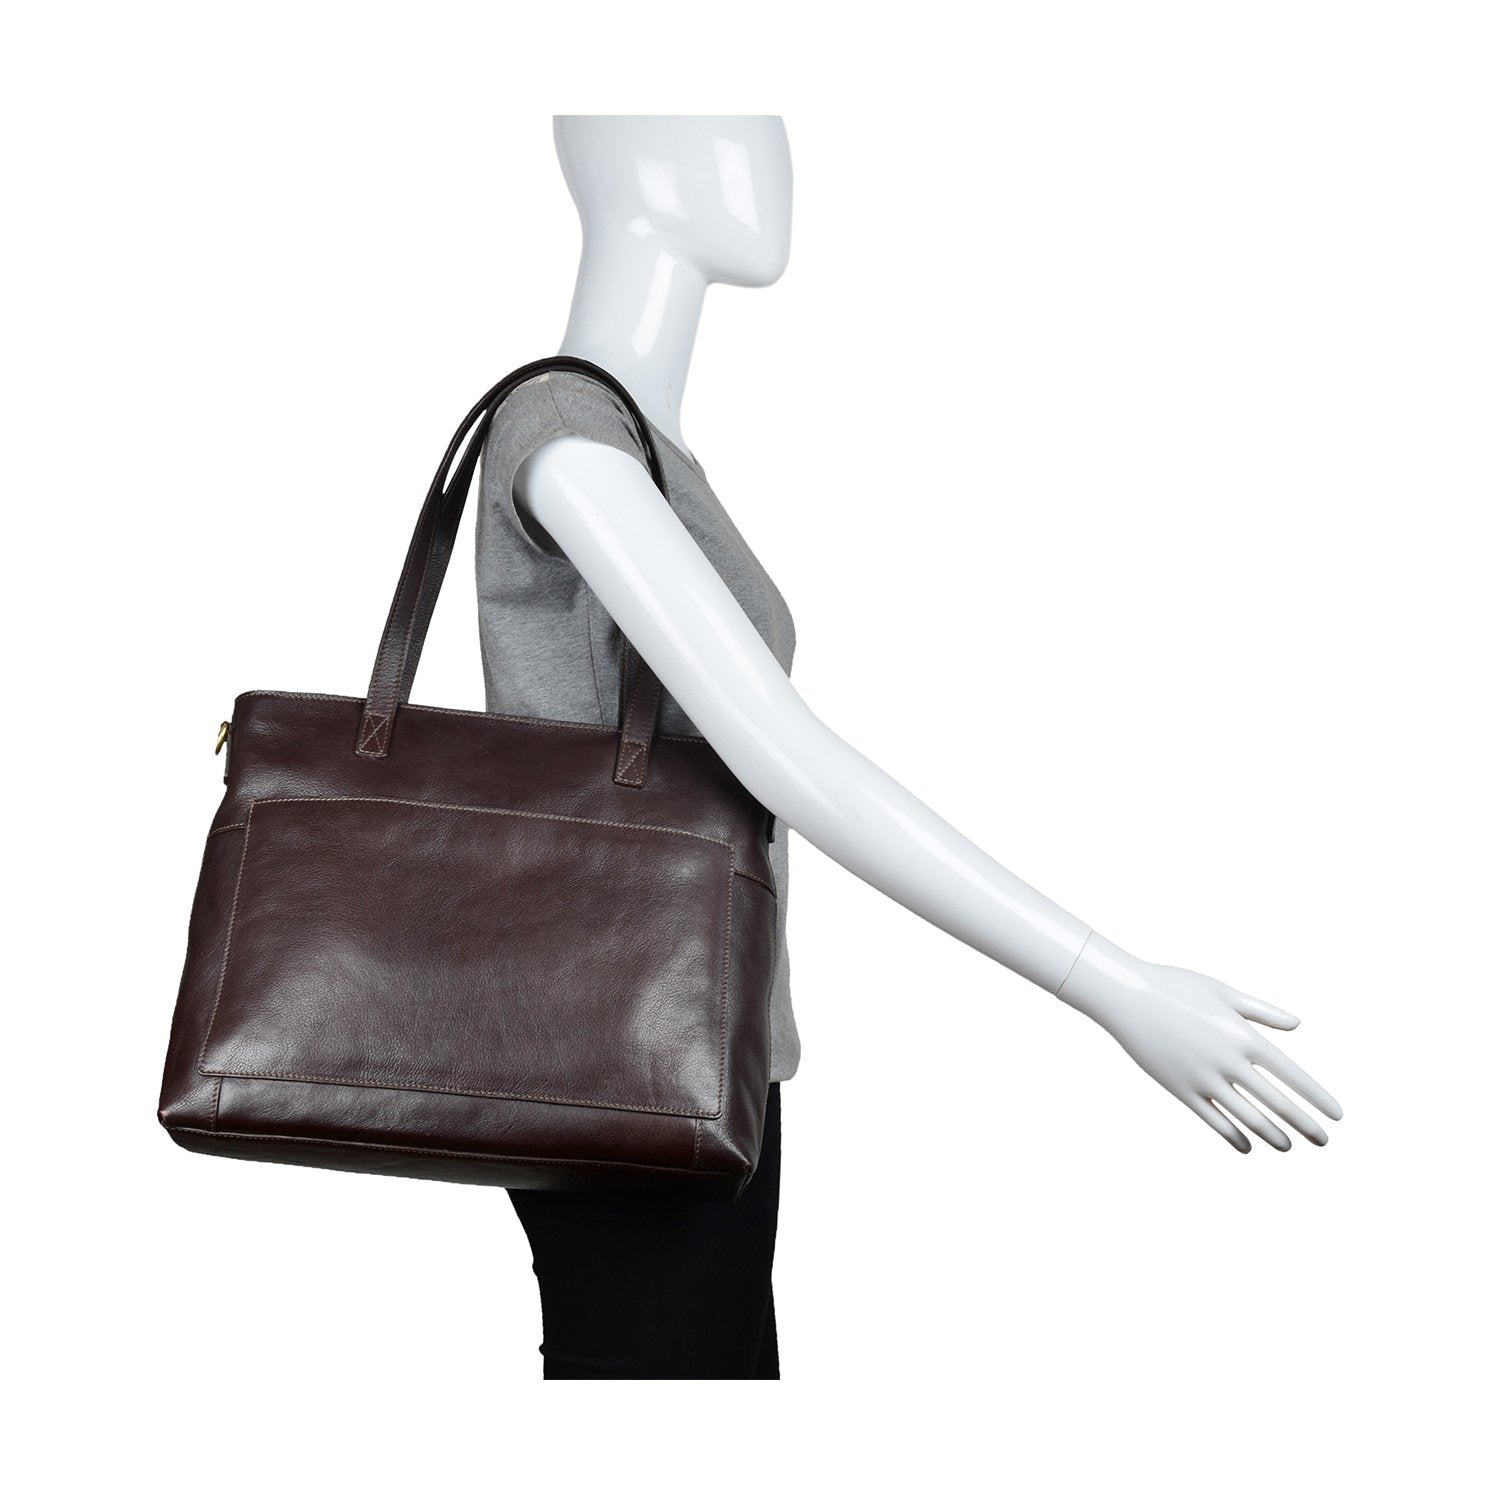 Bags & Luggage - Women's Bags - Shoulder Bags Sierra Leather Shoulder Bag With Sling Strap